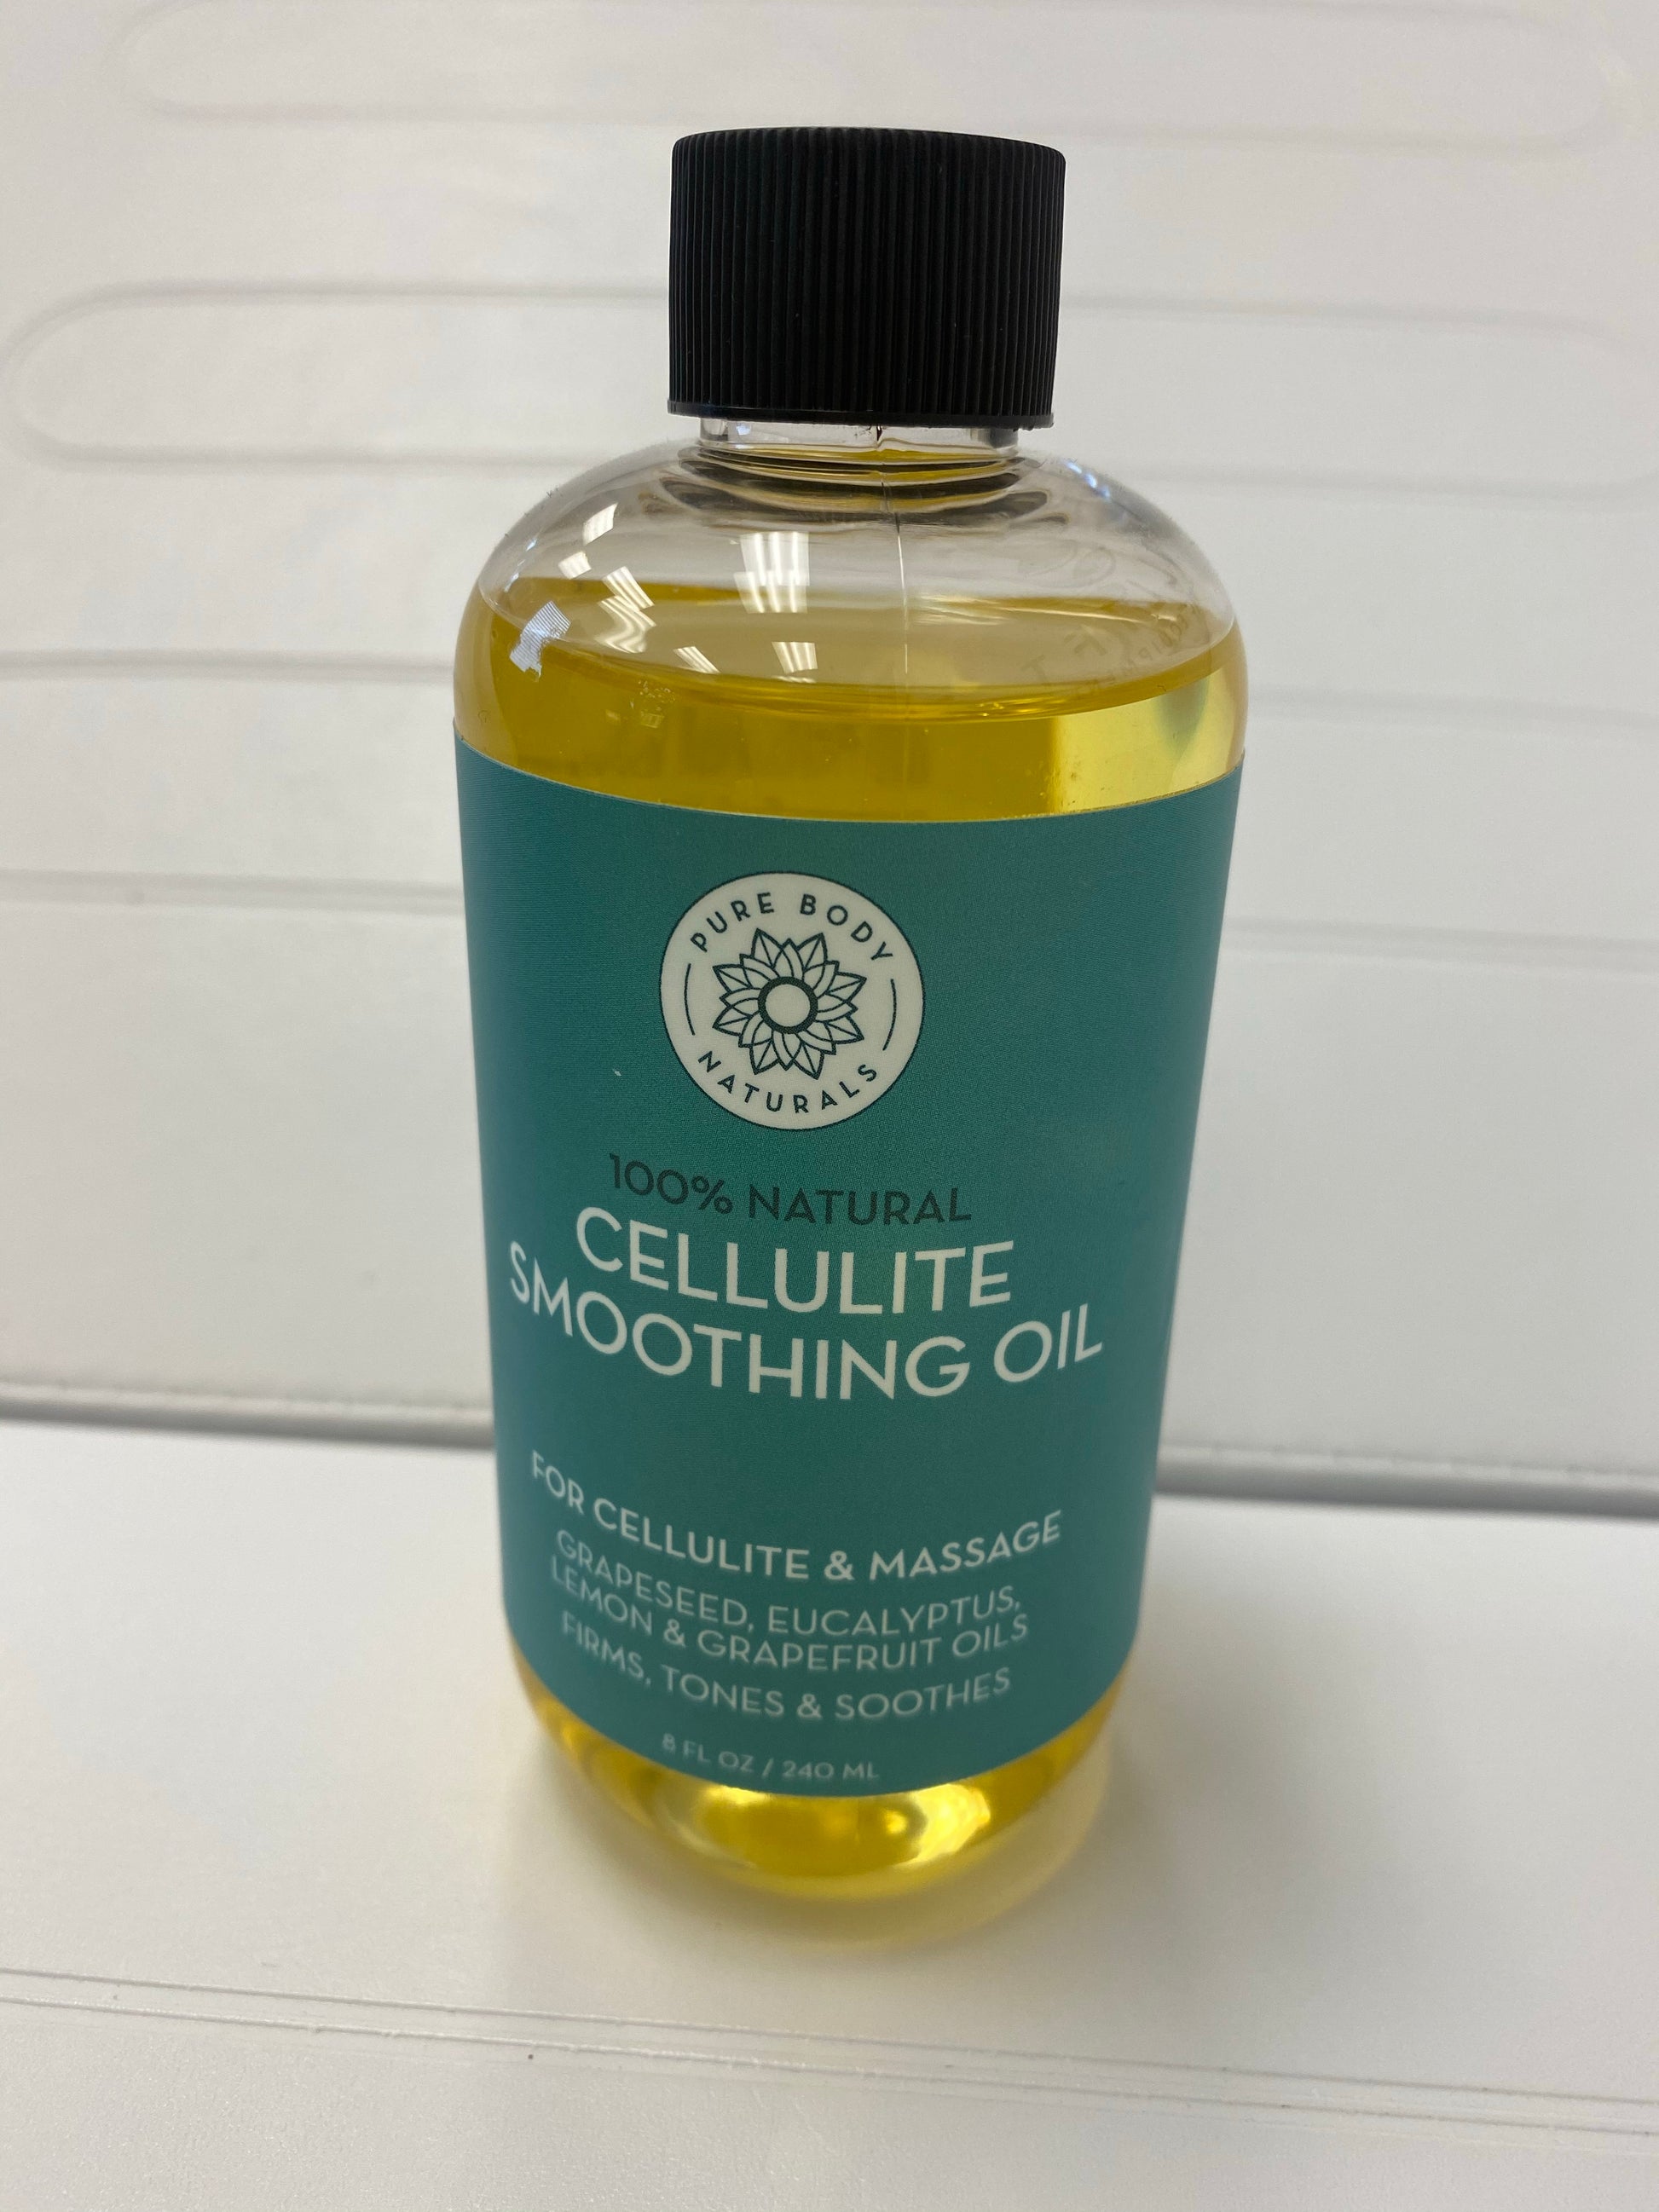 Cellulite Smoothing Oil, Cellulite Massage Oil